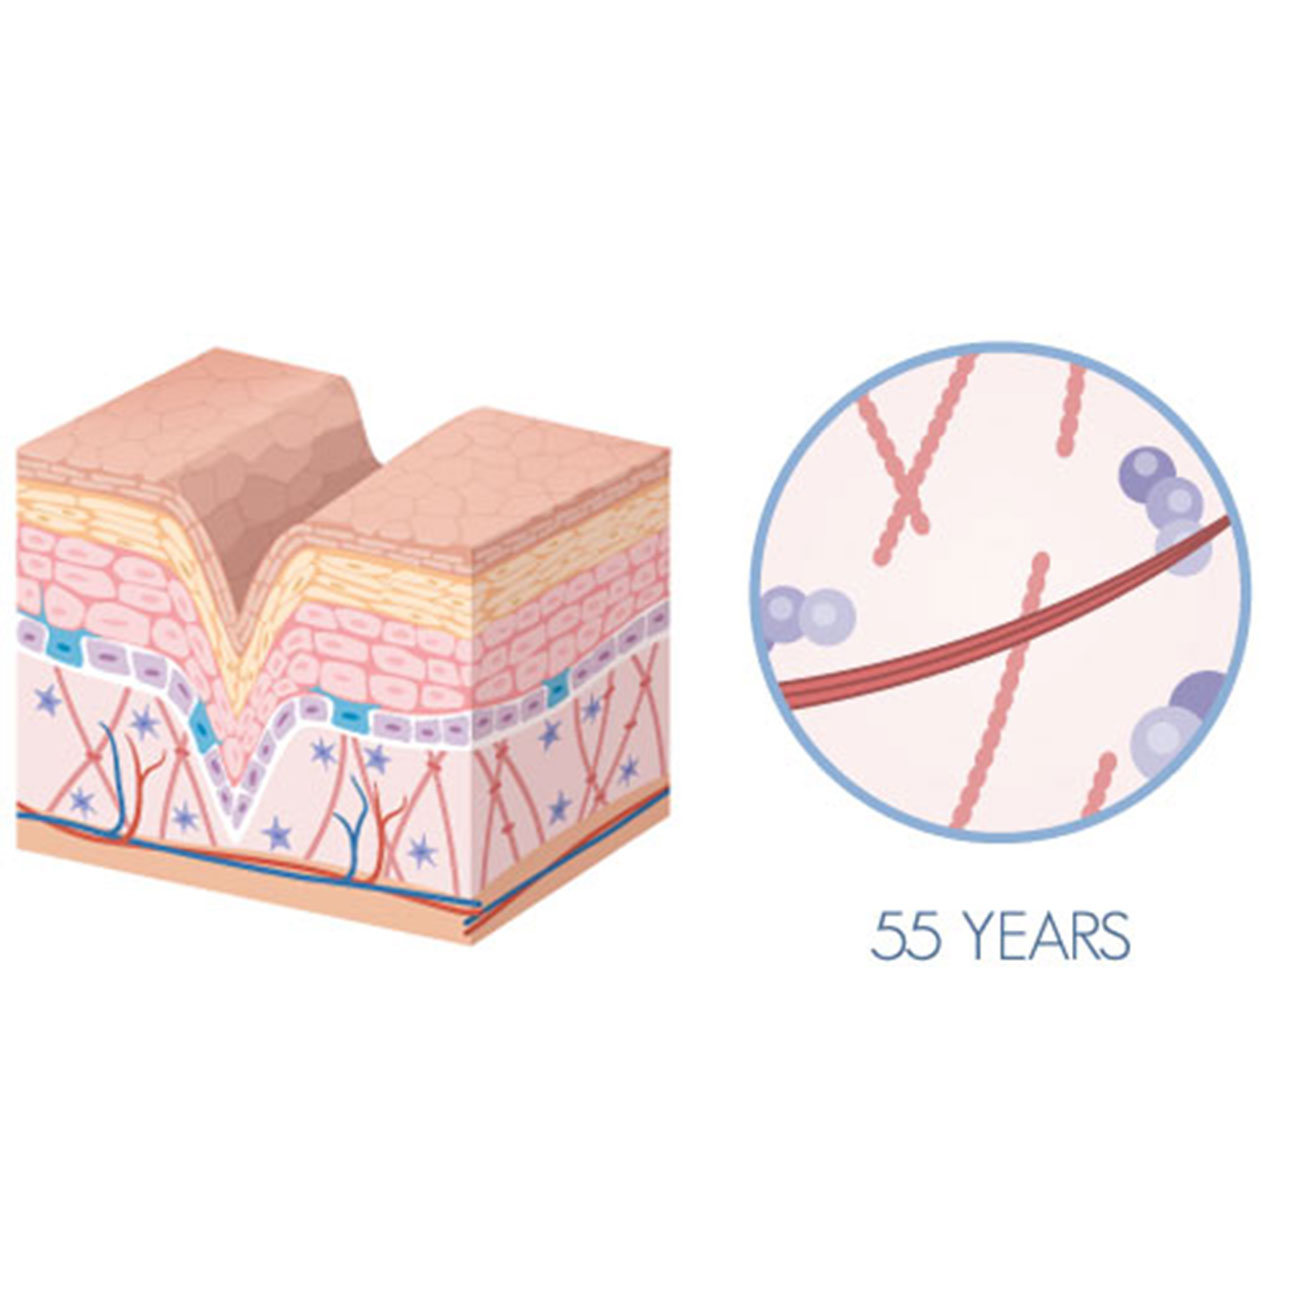 Skin appearance and collagen level diagram - after 50